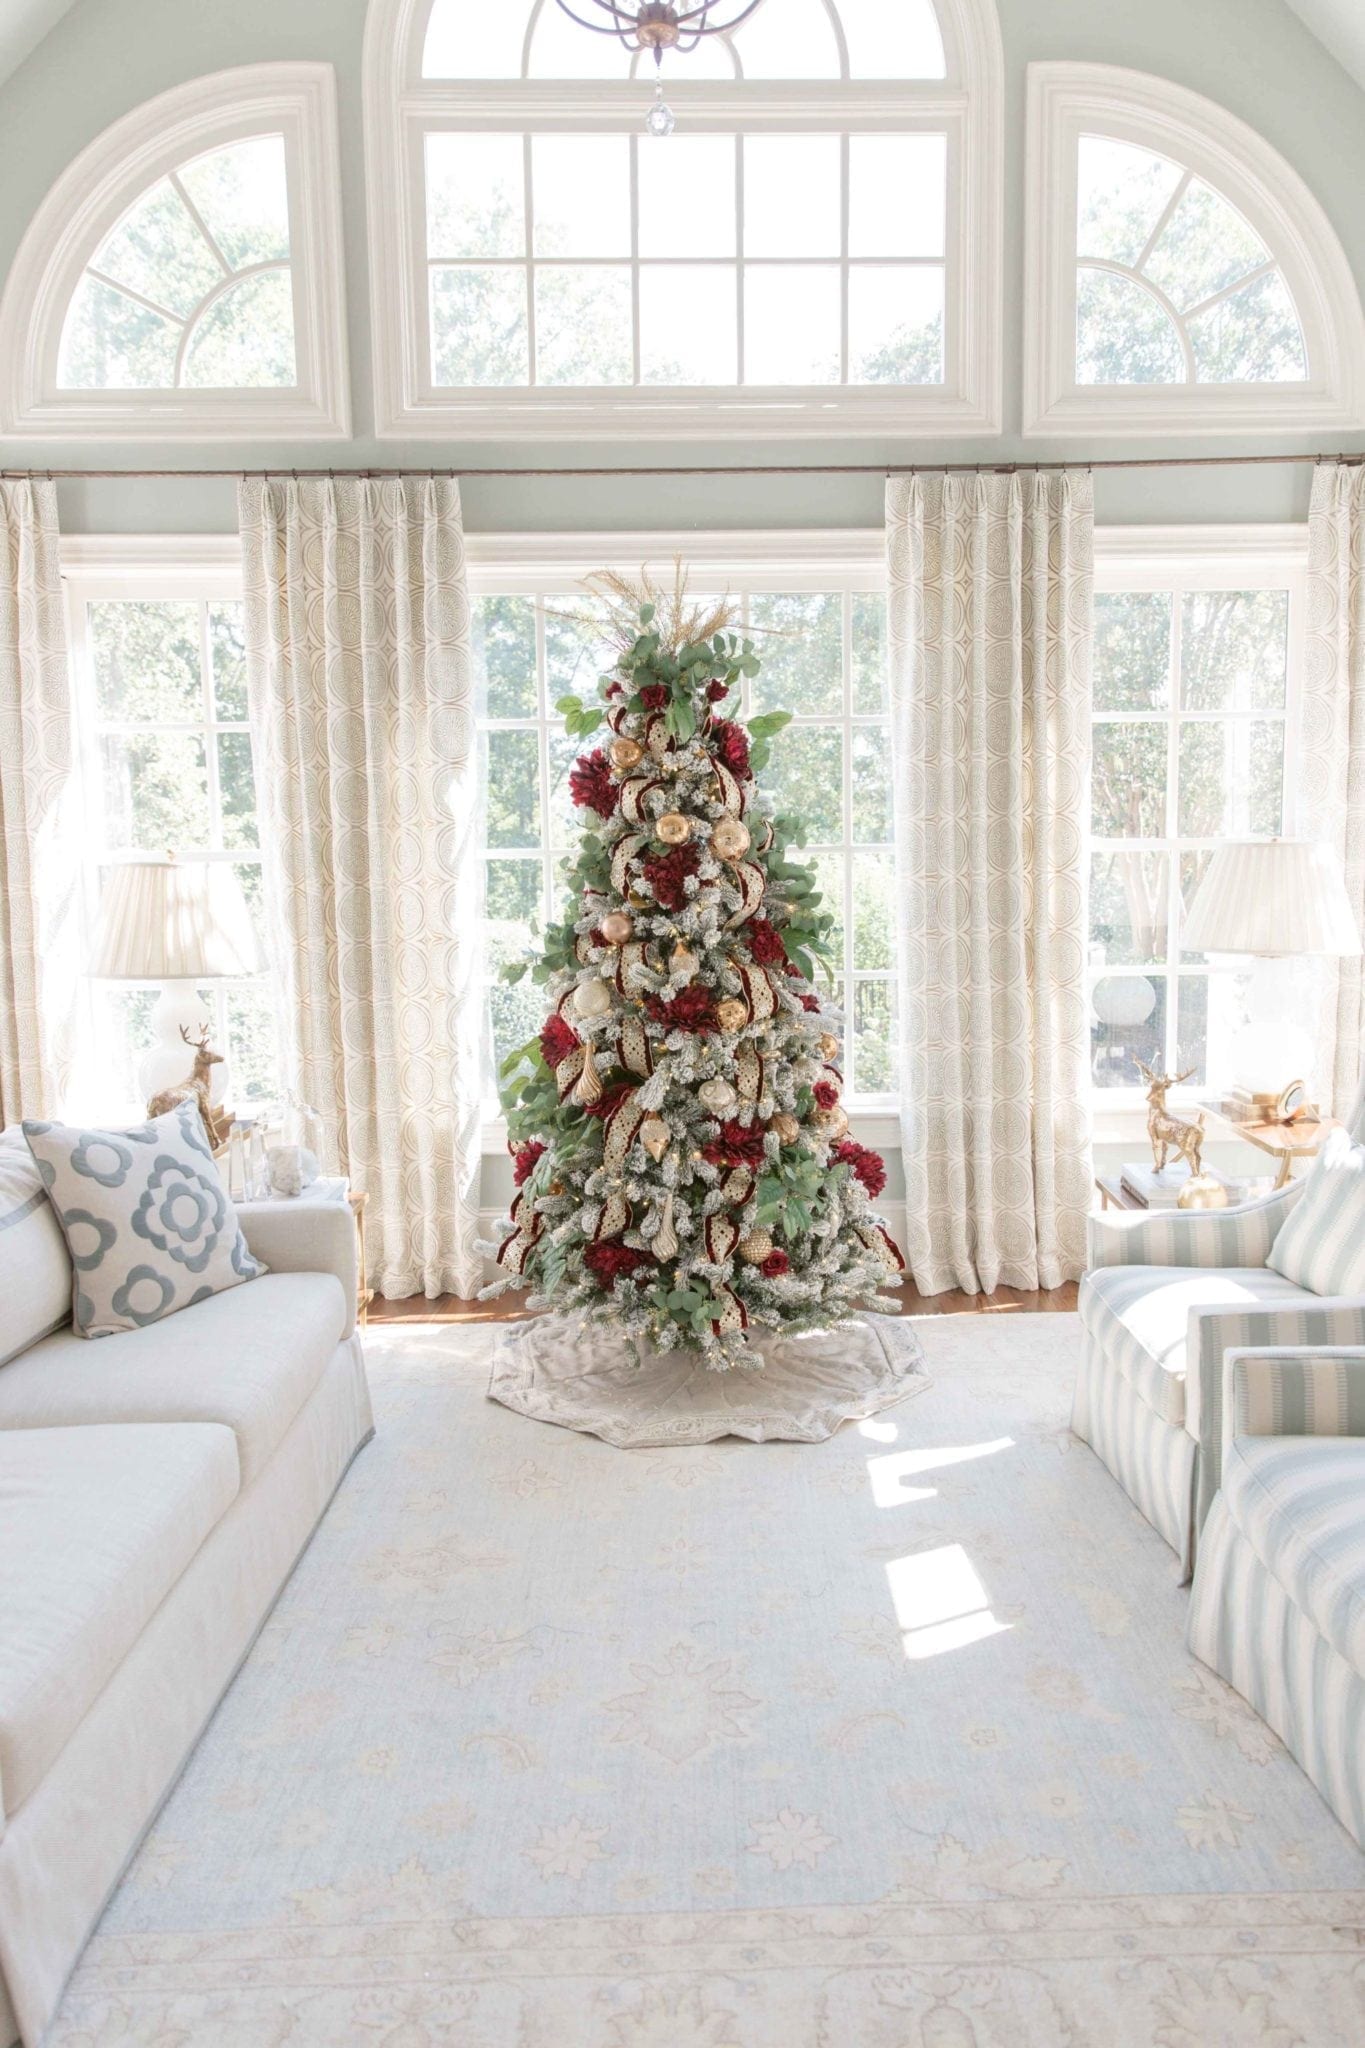 All the Christmas tree decorating ideas red and gold!